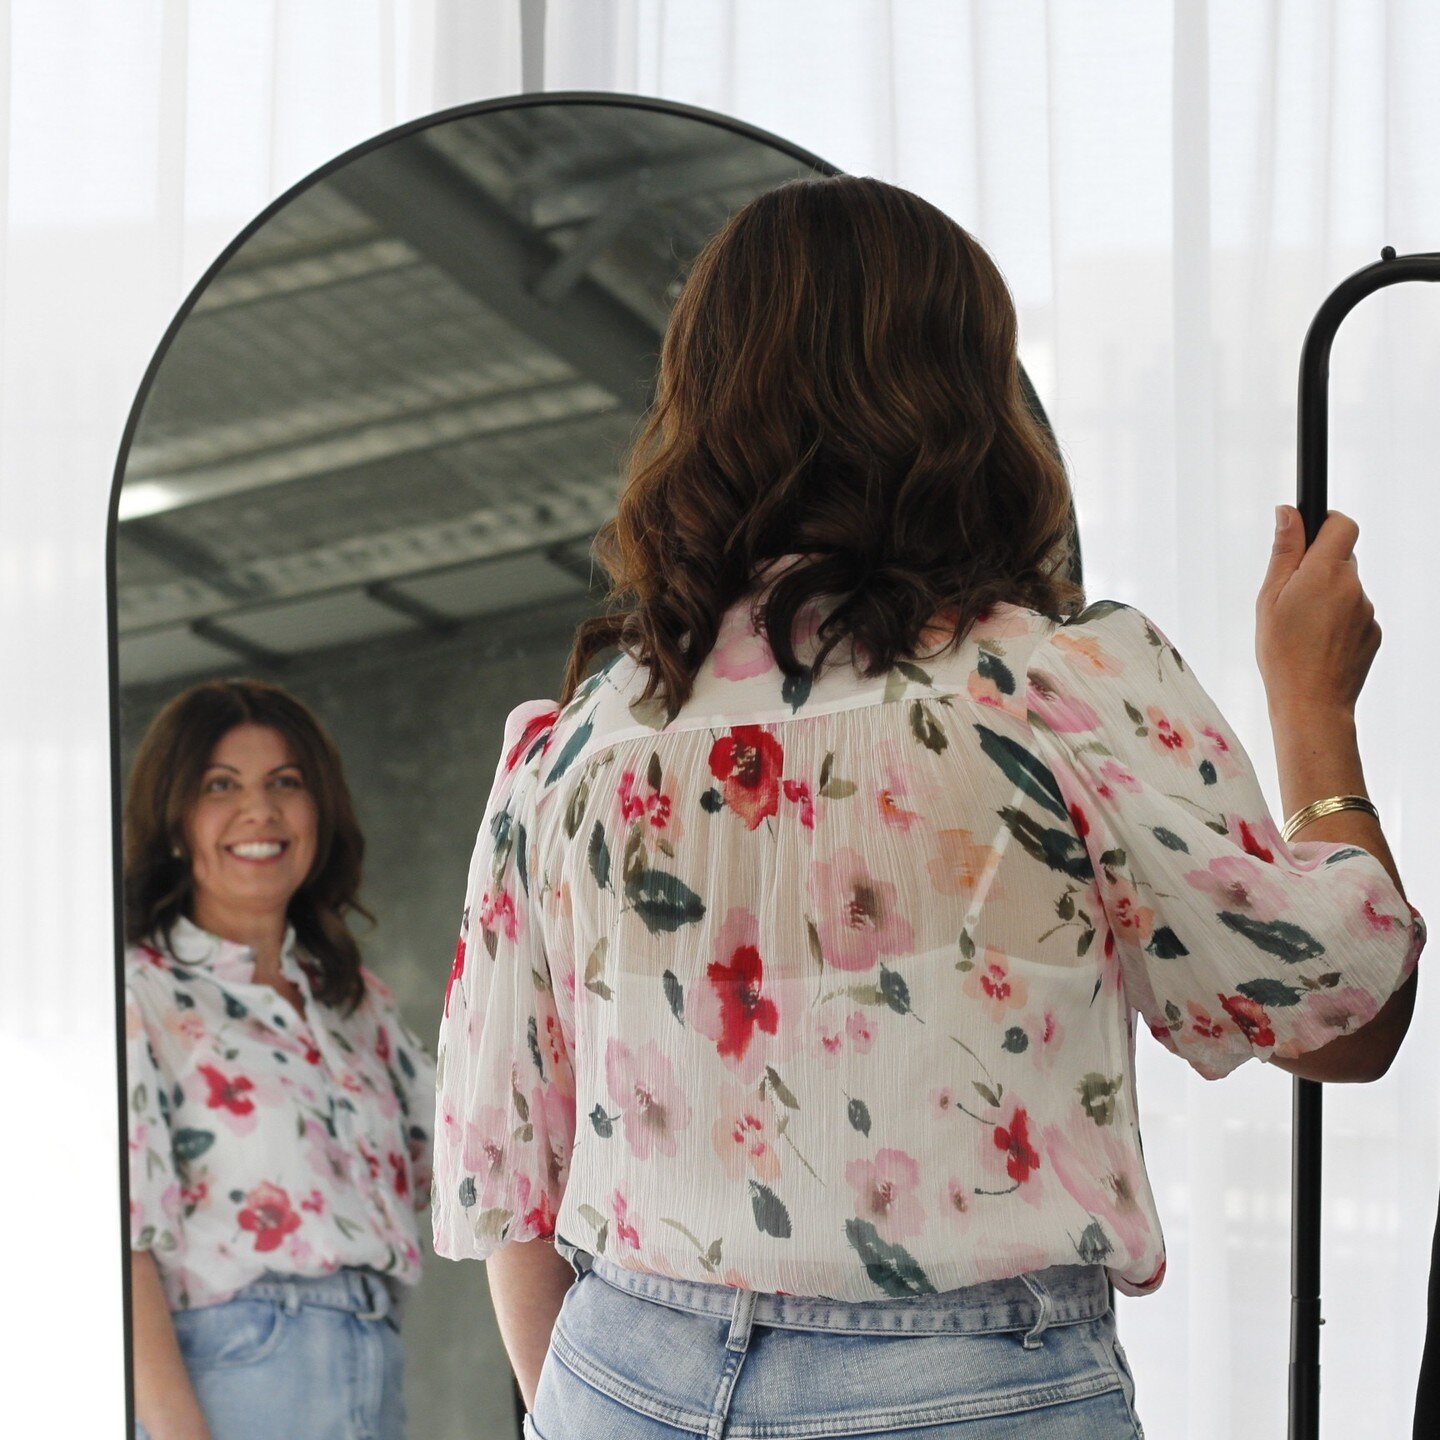 ARE YOU NOT HAPPY WITH YOUR REFLECTION IN THE MIRROR?

There is nothing wrong with your body it is because:

- You are picking out clothes that don't flatter your body type.
- Not sure how to put clothes together to create your own signature style.

